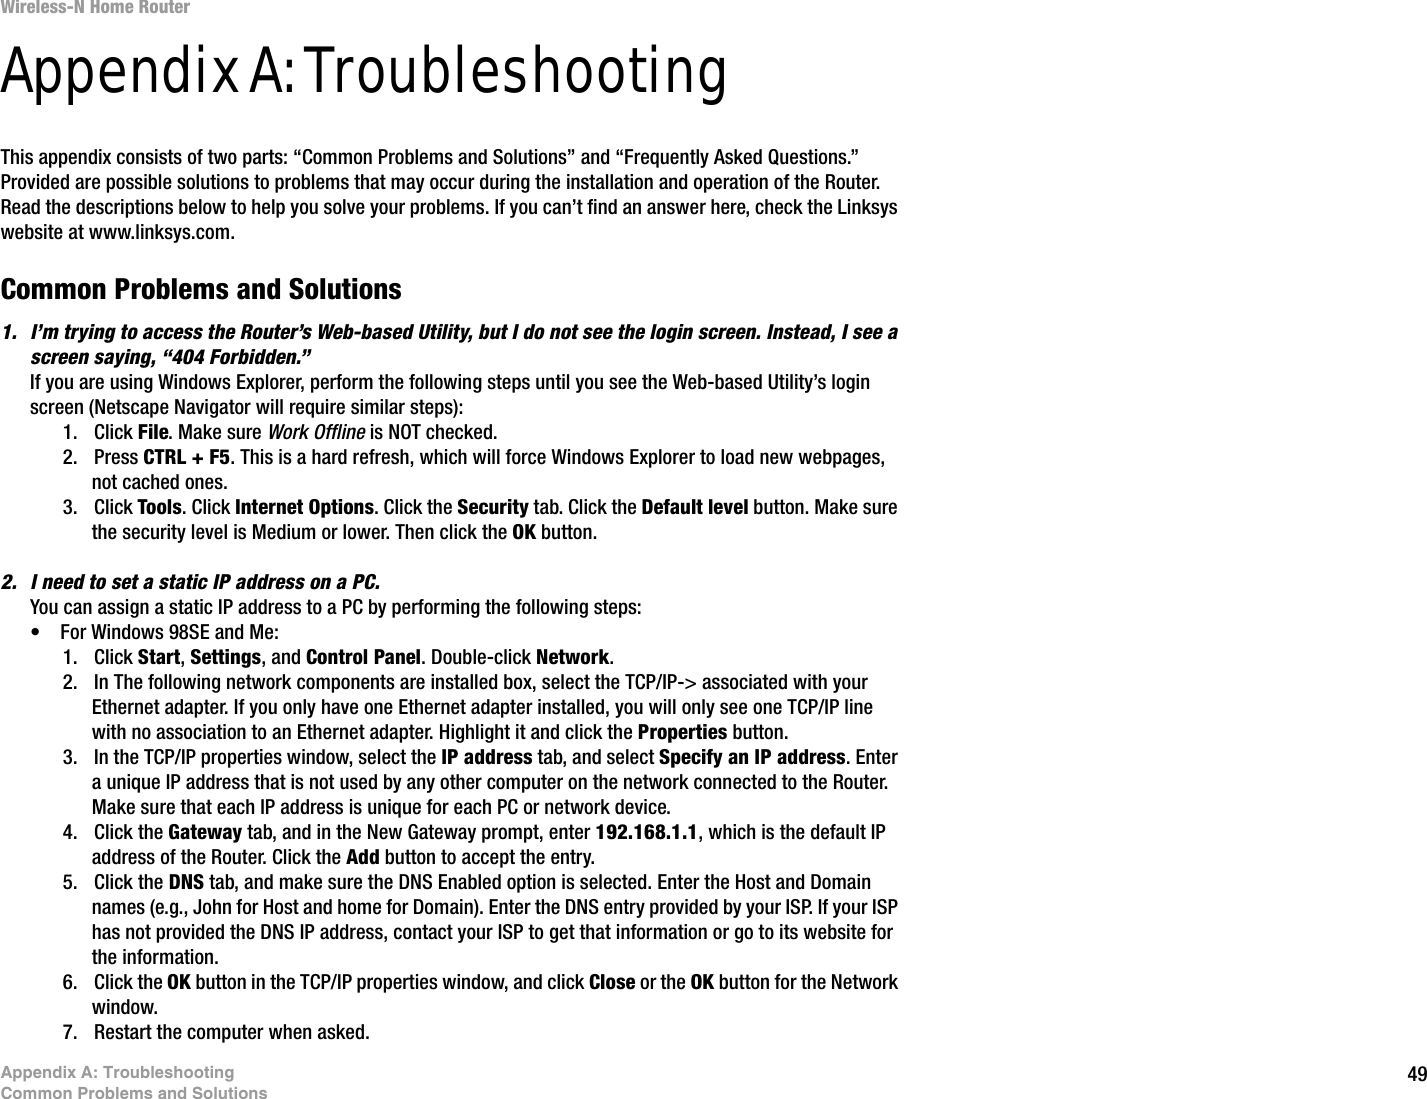 49Appendix A: TroubleshootingCommon Problems and SolutionsWireless-N Home RouterAppendix A: TroubleshootingThis appendix consists of two parts: “Common Problems and Solutions” and “Frequently Asked Questions.” Provided are possible solutions to problems that may occur during the installation and operation of the Router. Read the descriptions below to help you solve your problems. If you can’t find an answer here, check the Linksys website at www.linksys.com.Common Problems and Solutions1. I’m trying to access the Router’s Web-based Utility, but I do not see the login screen. Instead, I see a screen saying, “404 Forbidden.”If you are using Windows Explorer, perform the following steps until you see the Web-based Utility’s login screen (Netscape Navigator will require similar steps):1. Click File. Make sure Work Offline is NOT checked.2. Press CTRL + F5. This is a hard refresh, which will force Windows Explorer to load new webpages, not cached ones.3. Click Tools. Click Internet Options. Click the Security tab. Click the Default level button. Make sure the security level is Medium or lower. Then click the OK button.2. I need to set a static IP address on a PC.You can assign a static IP address to a PC by performing the following steps:• For Windows 98SE and Me:1. Click Start, Settings, and Control Panel. Double-click Network.2. In The following network components are installed box, select the TCP/IP-&gt; associated with your Ethernet adapter. If you only have one Ethernet adapter installed, you will only see one TCP/IP line with no association to an Ethernet adapter. Highlight it and click the Properties button.3. In the TCP/IP properties window, select the IP address tab, and select Specify an IP address. Enter a unique IP address that is not used by any other computer on the network connected to the Router. Make sure that each IP address is unique for each PC or network device.4. Click the Gateway tab, and in the New Gateway prompt, enter 192.168.1.1, which is the default IP address of the Router. Click the Add button to accept the entry.5. Click the DNS tab, and make sure the DNS Enabled option is selected. Enter the Host and Domain names (e.g., John for Host and home for Domain). Enter the DNS entry provided by your ISP. If your ISP has not provided the DNS IP address, contact your ISP to get that information or go to its website for the information.6. Click the OK button in the TCP/IP properties window, and click Close or the OK button for the Network window.7. Restart the computer when asked.